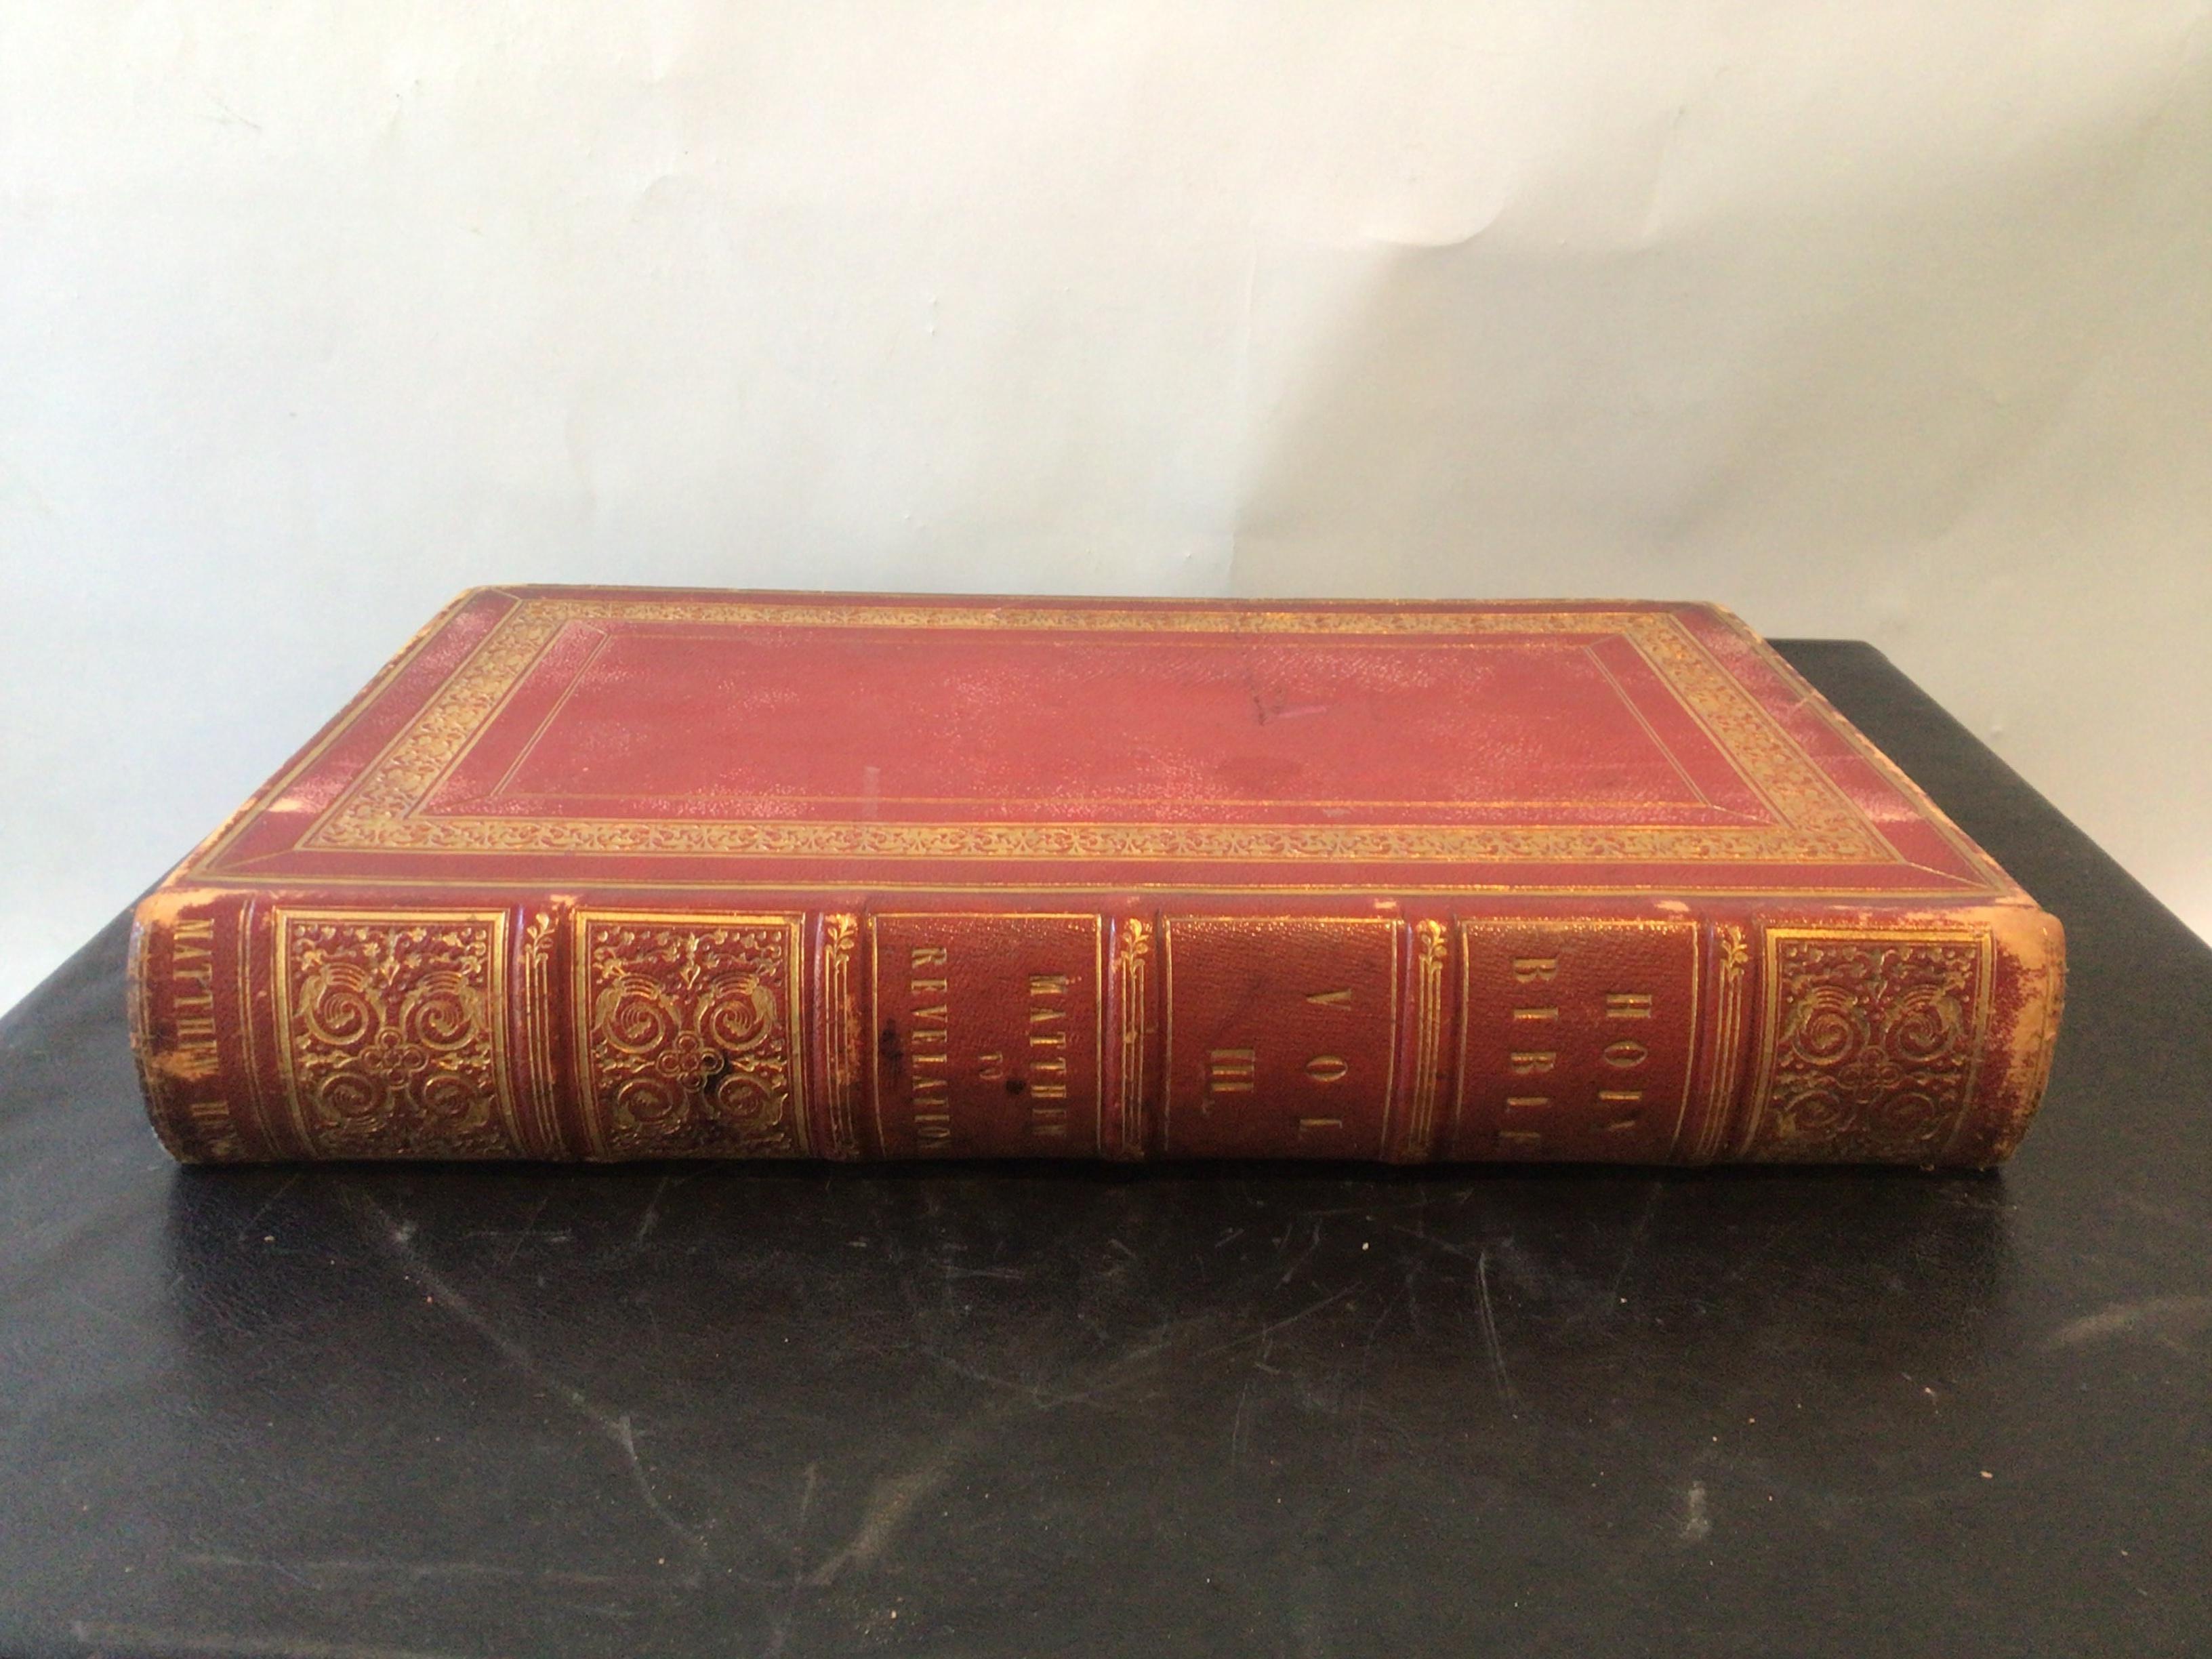 1820s 3 Volume Family Bible Commentary by Mathew Henry For Sale 4